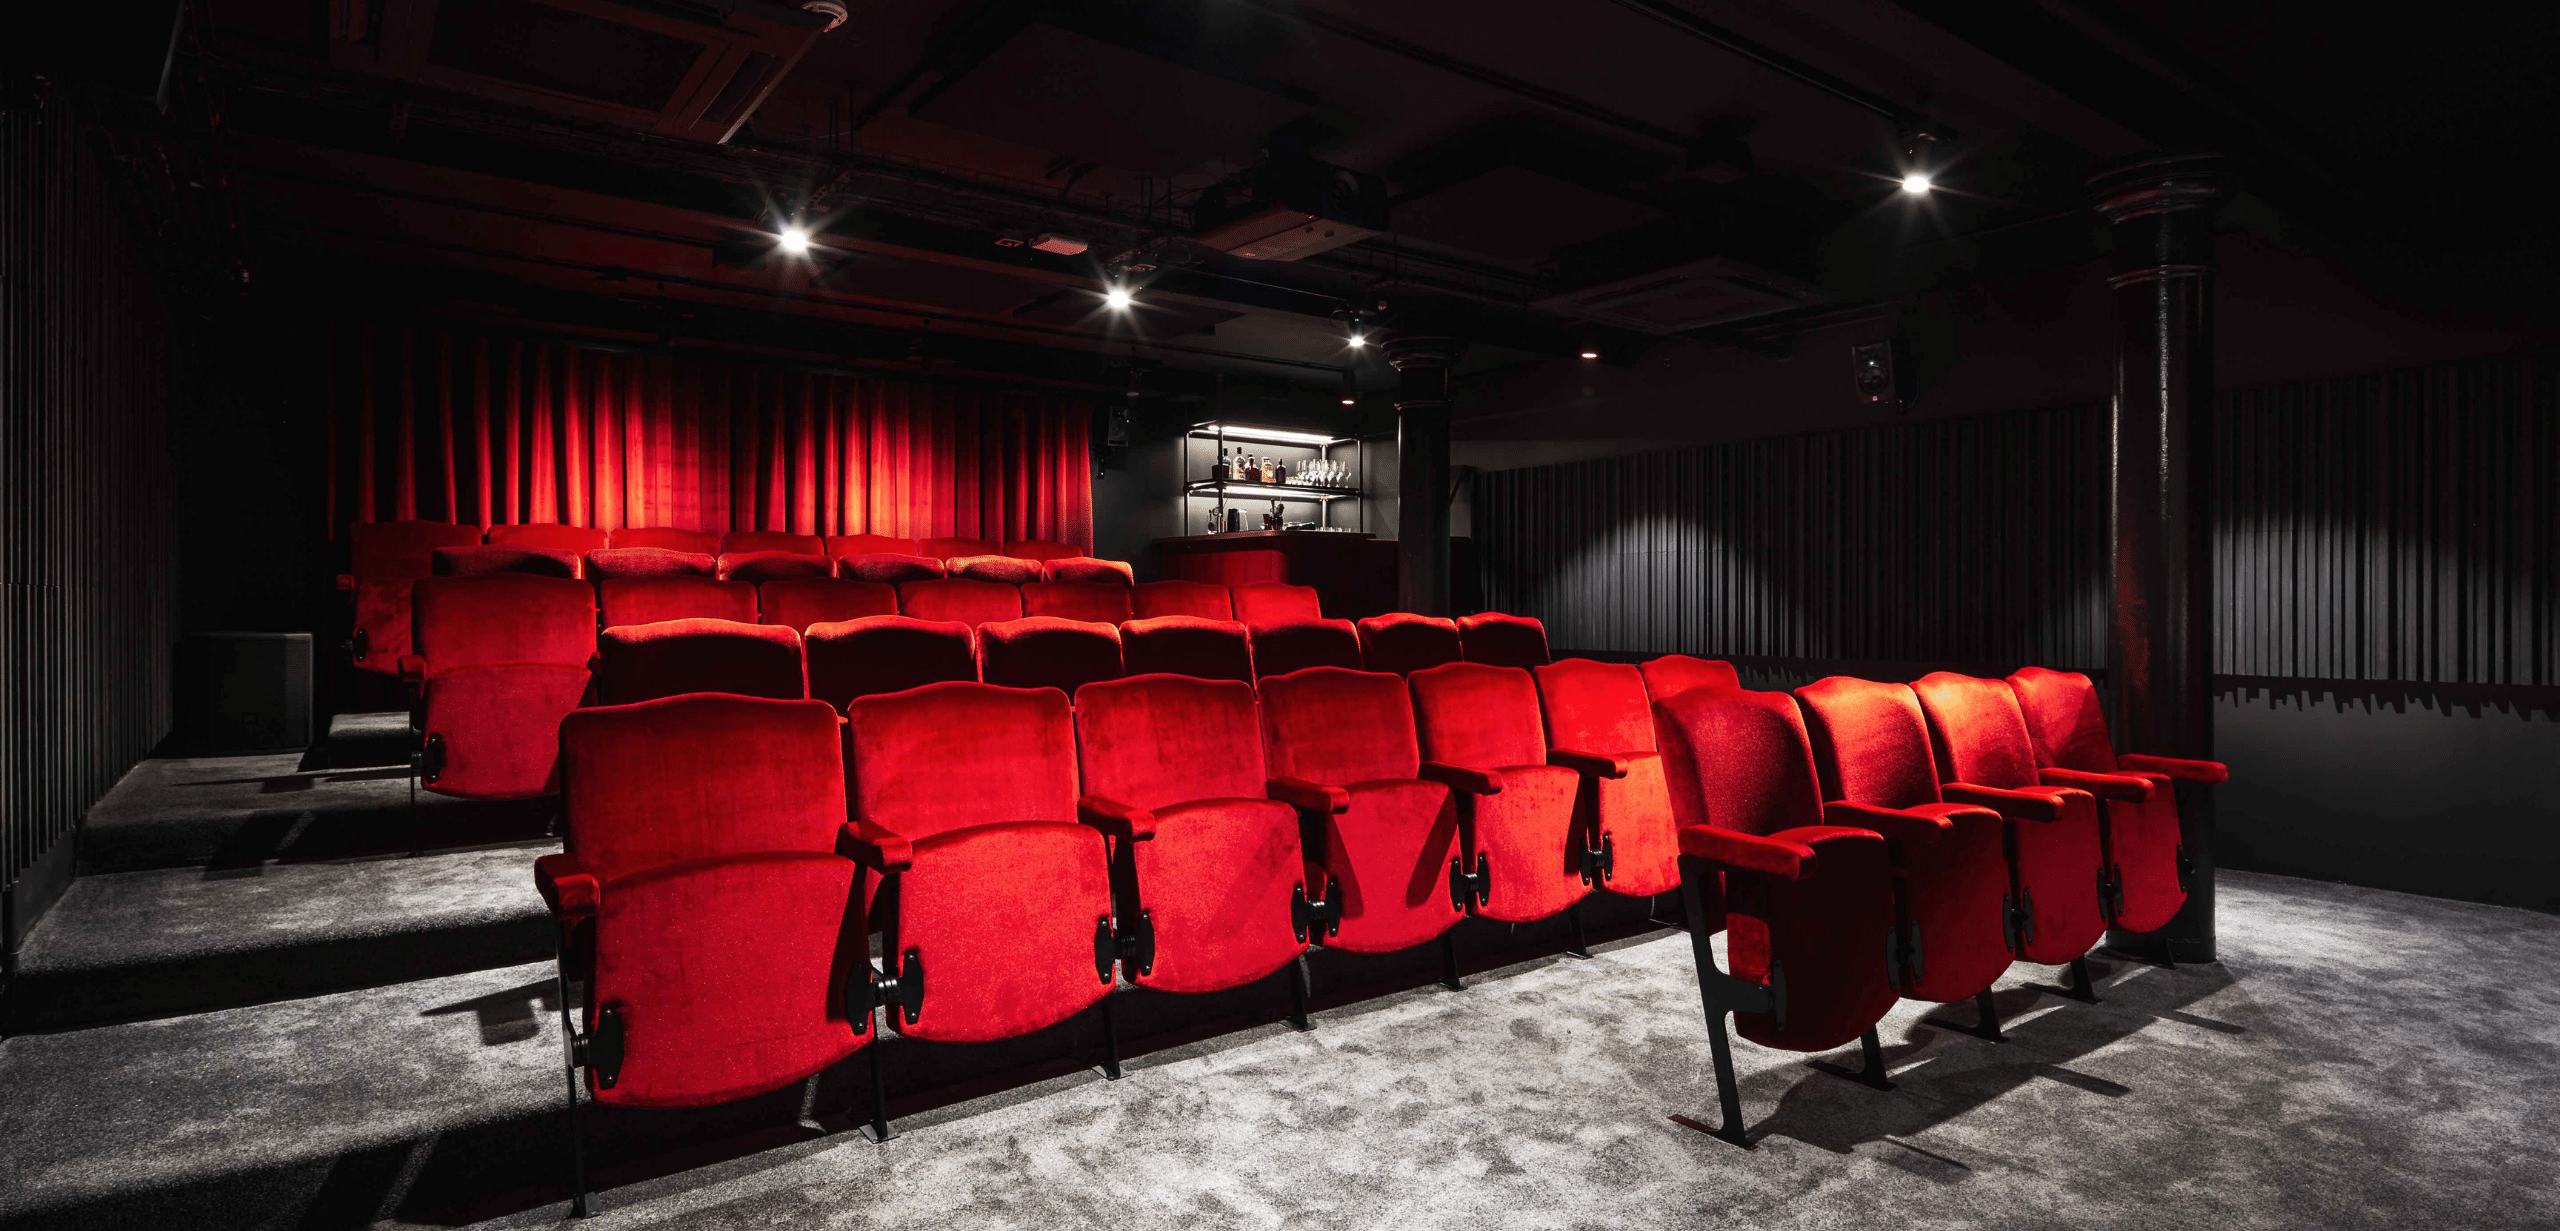 A movie theater with red theater style seating and a black curtain.